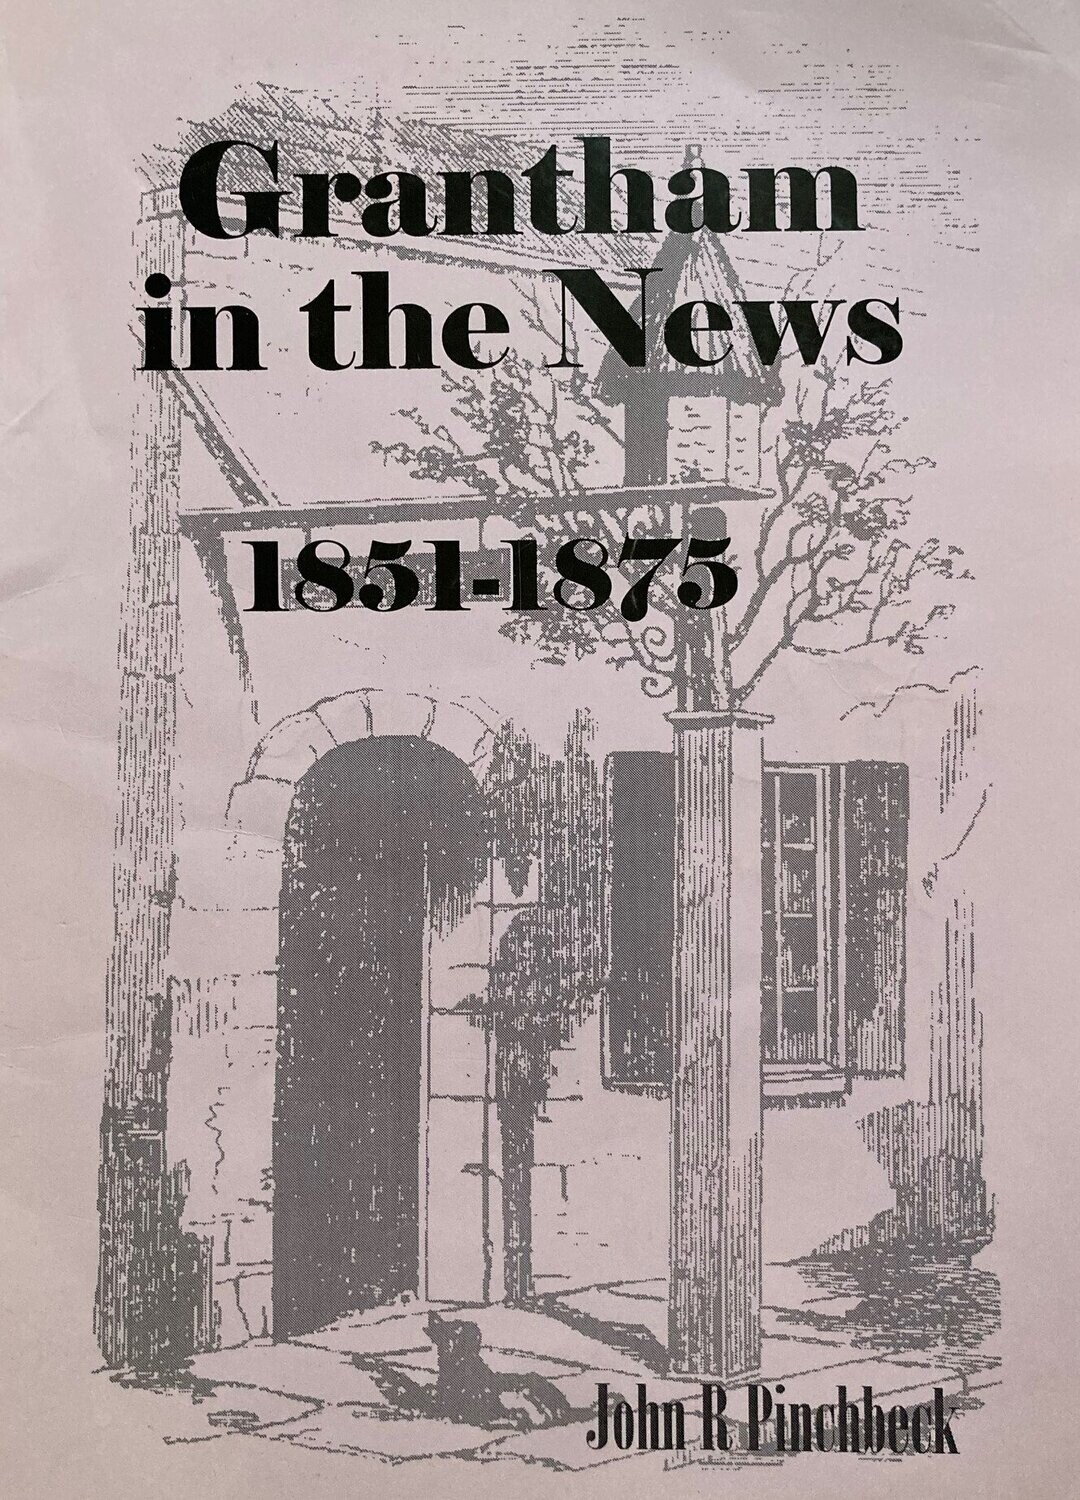 Grantham in the News 1851-1875 by John Pinchbeck